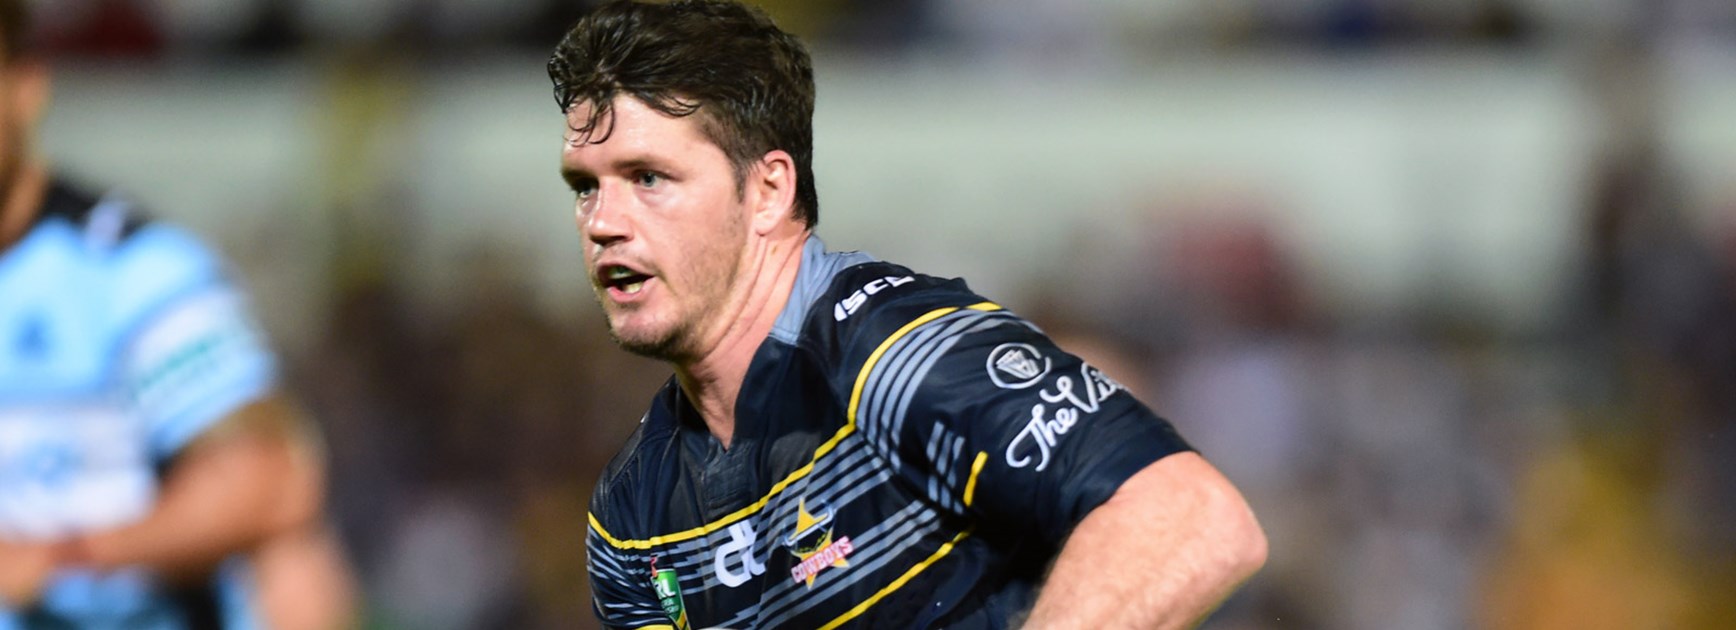 Cowboys fullback Lachlan Coote could make the step up to Origin in 2016.